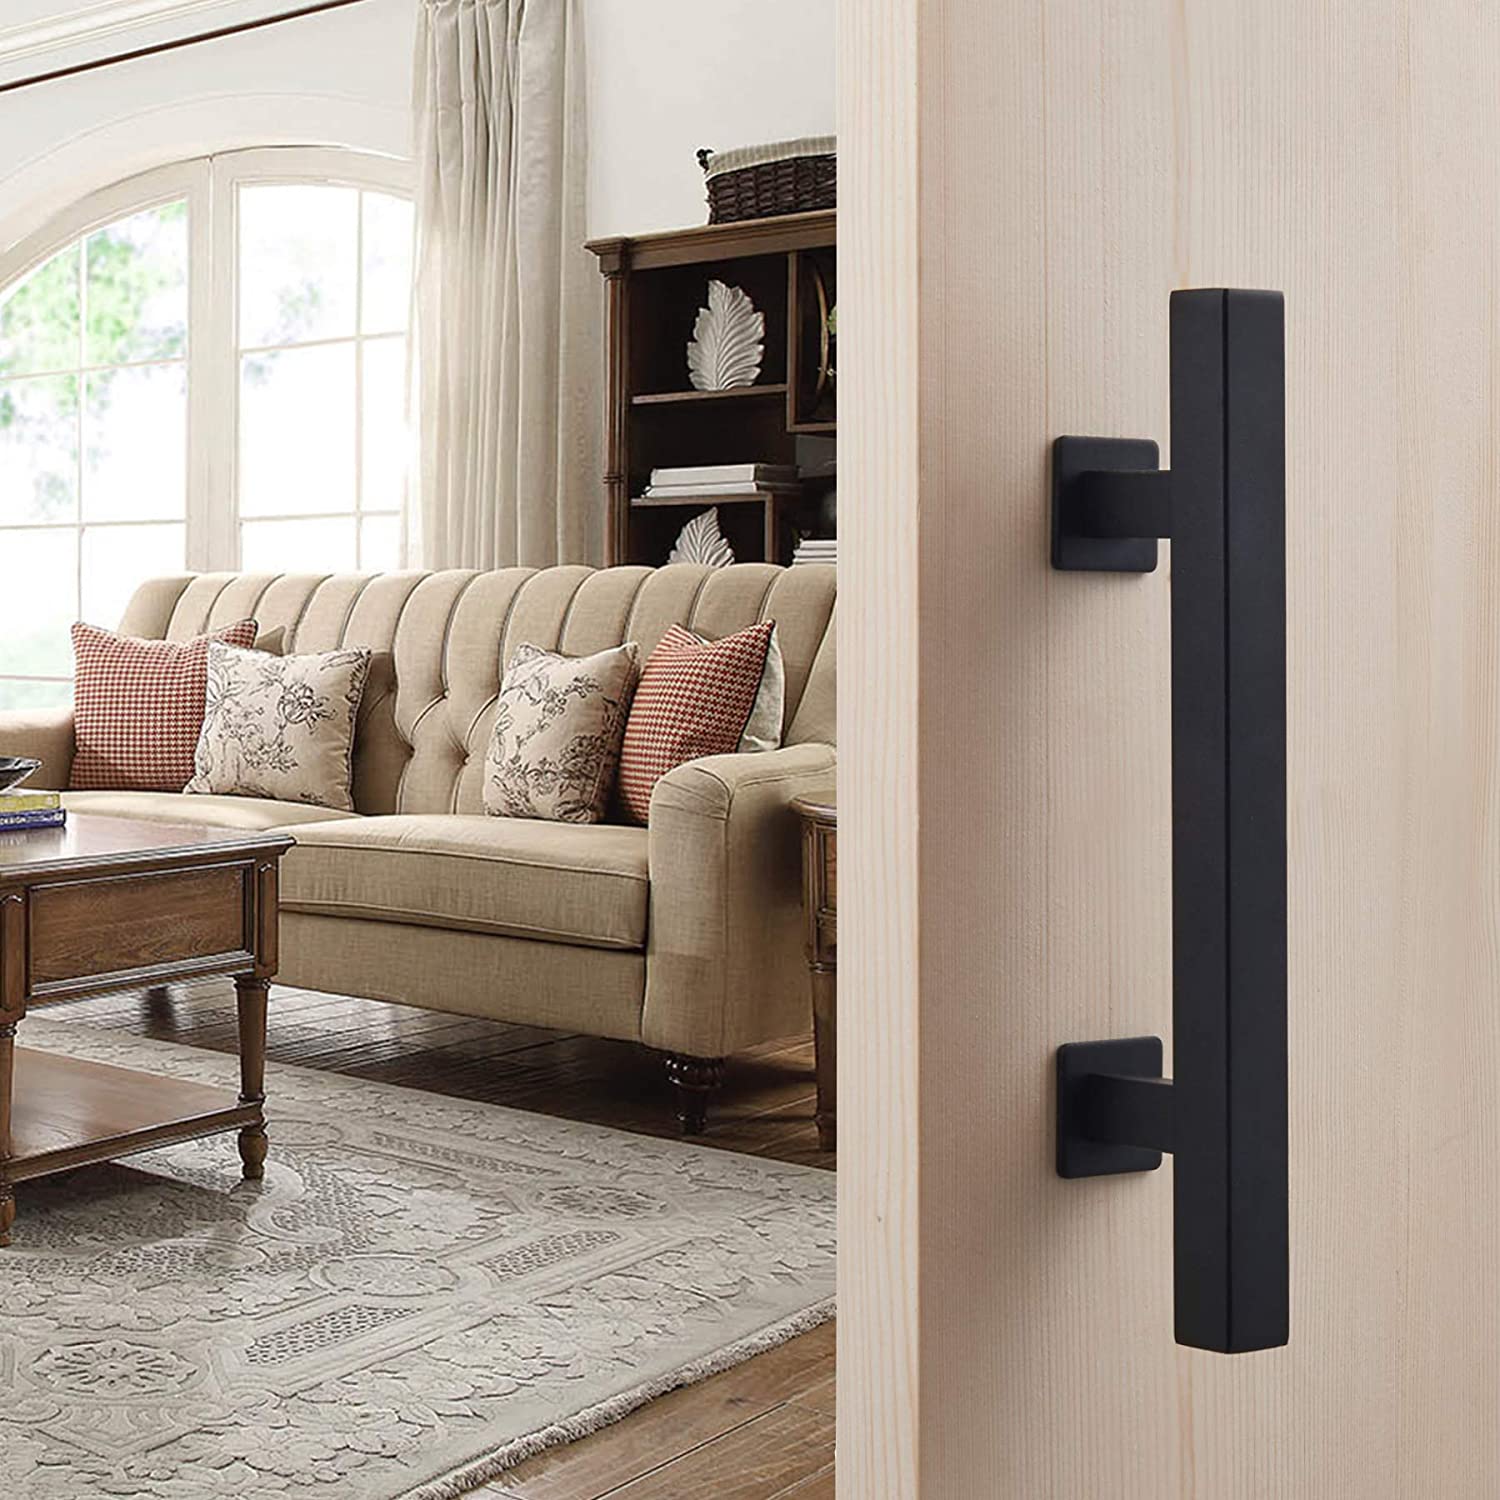 FaithLand 12" Barn Door Handle with Flush Finger Pull, Pull and Flush Door Handle Set in Black, Square - Fit Doors Up to 2 3/8'' 12" Black Pull Handle (Square) - image 3 of 7